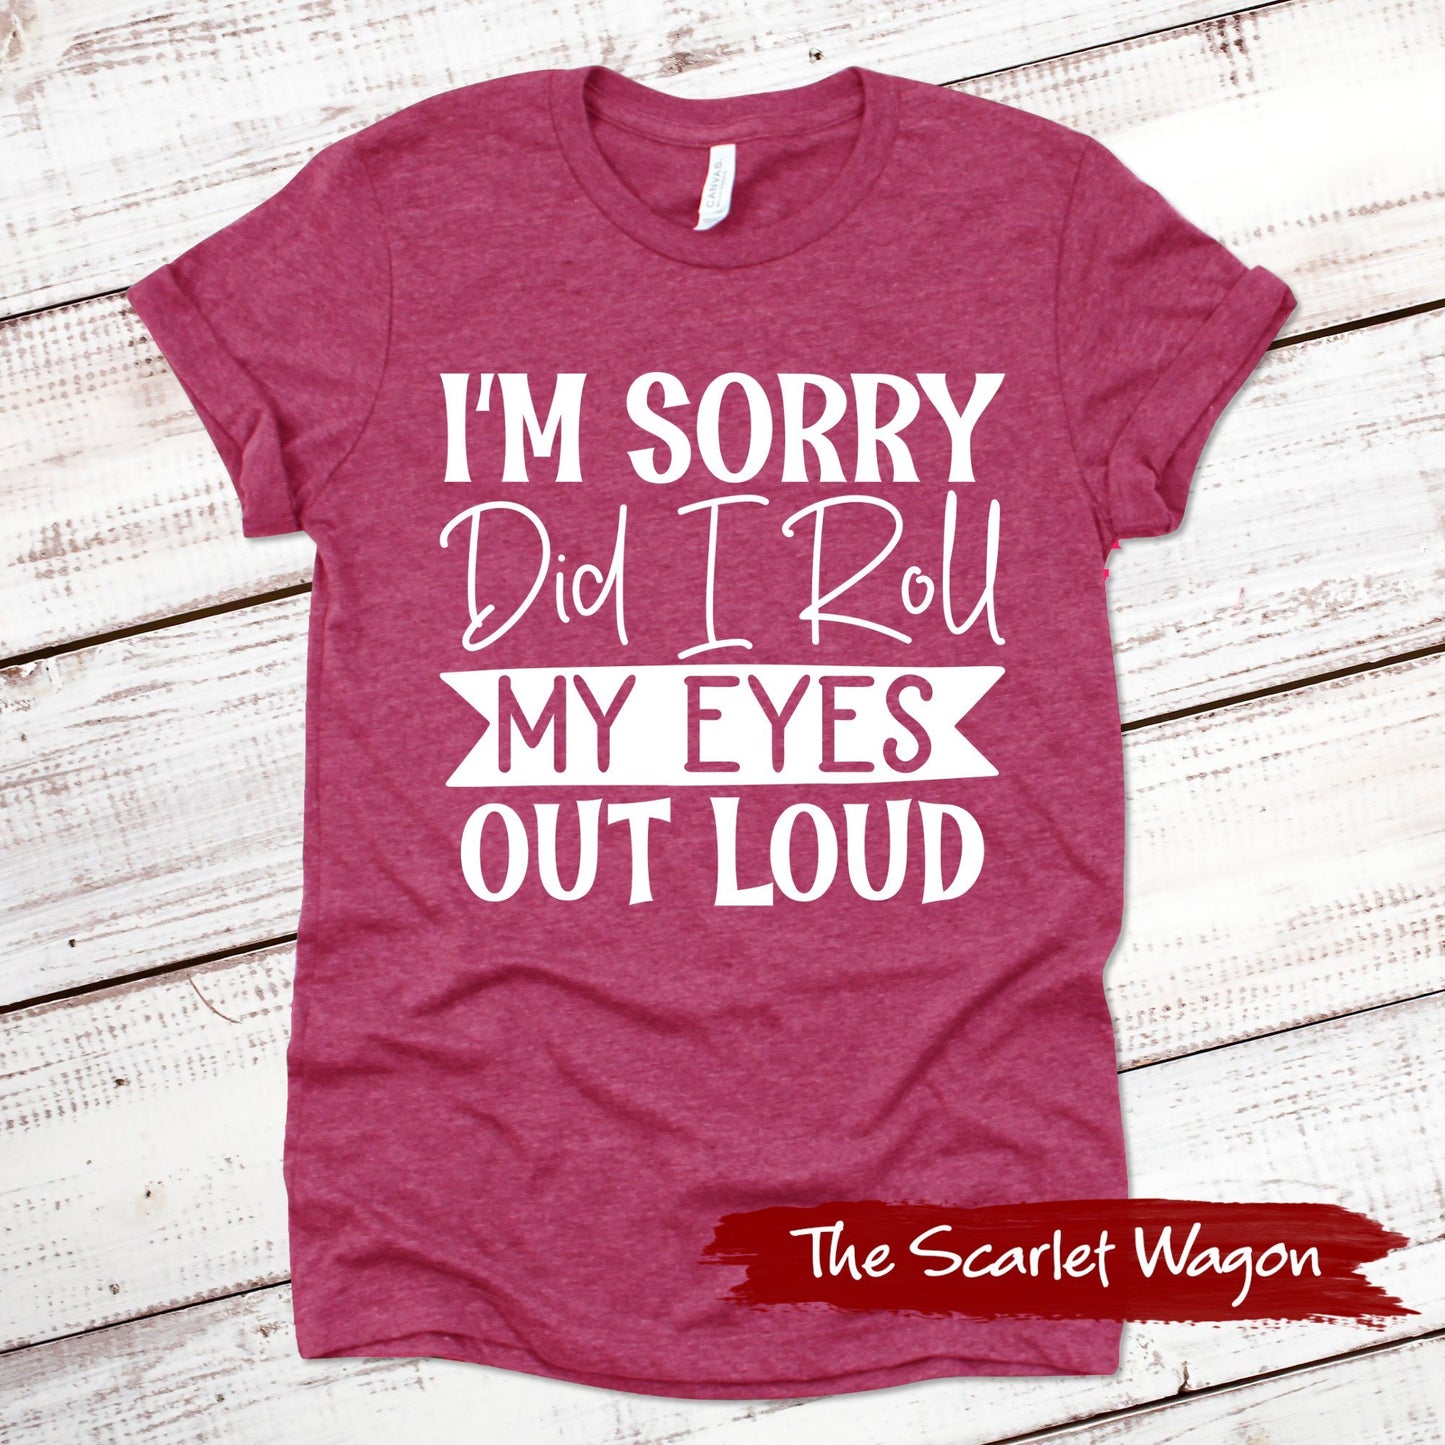 I'm Sorry Did I Roll My Eyes Out Loud Funny Shirt Scarlet Wagon Heather Raspberry XS 